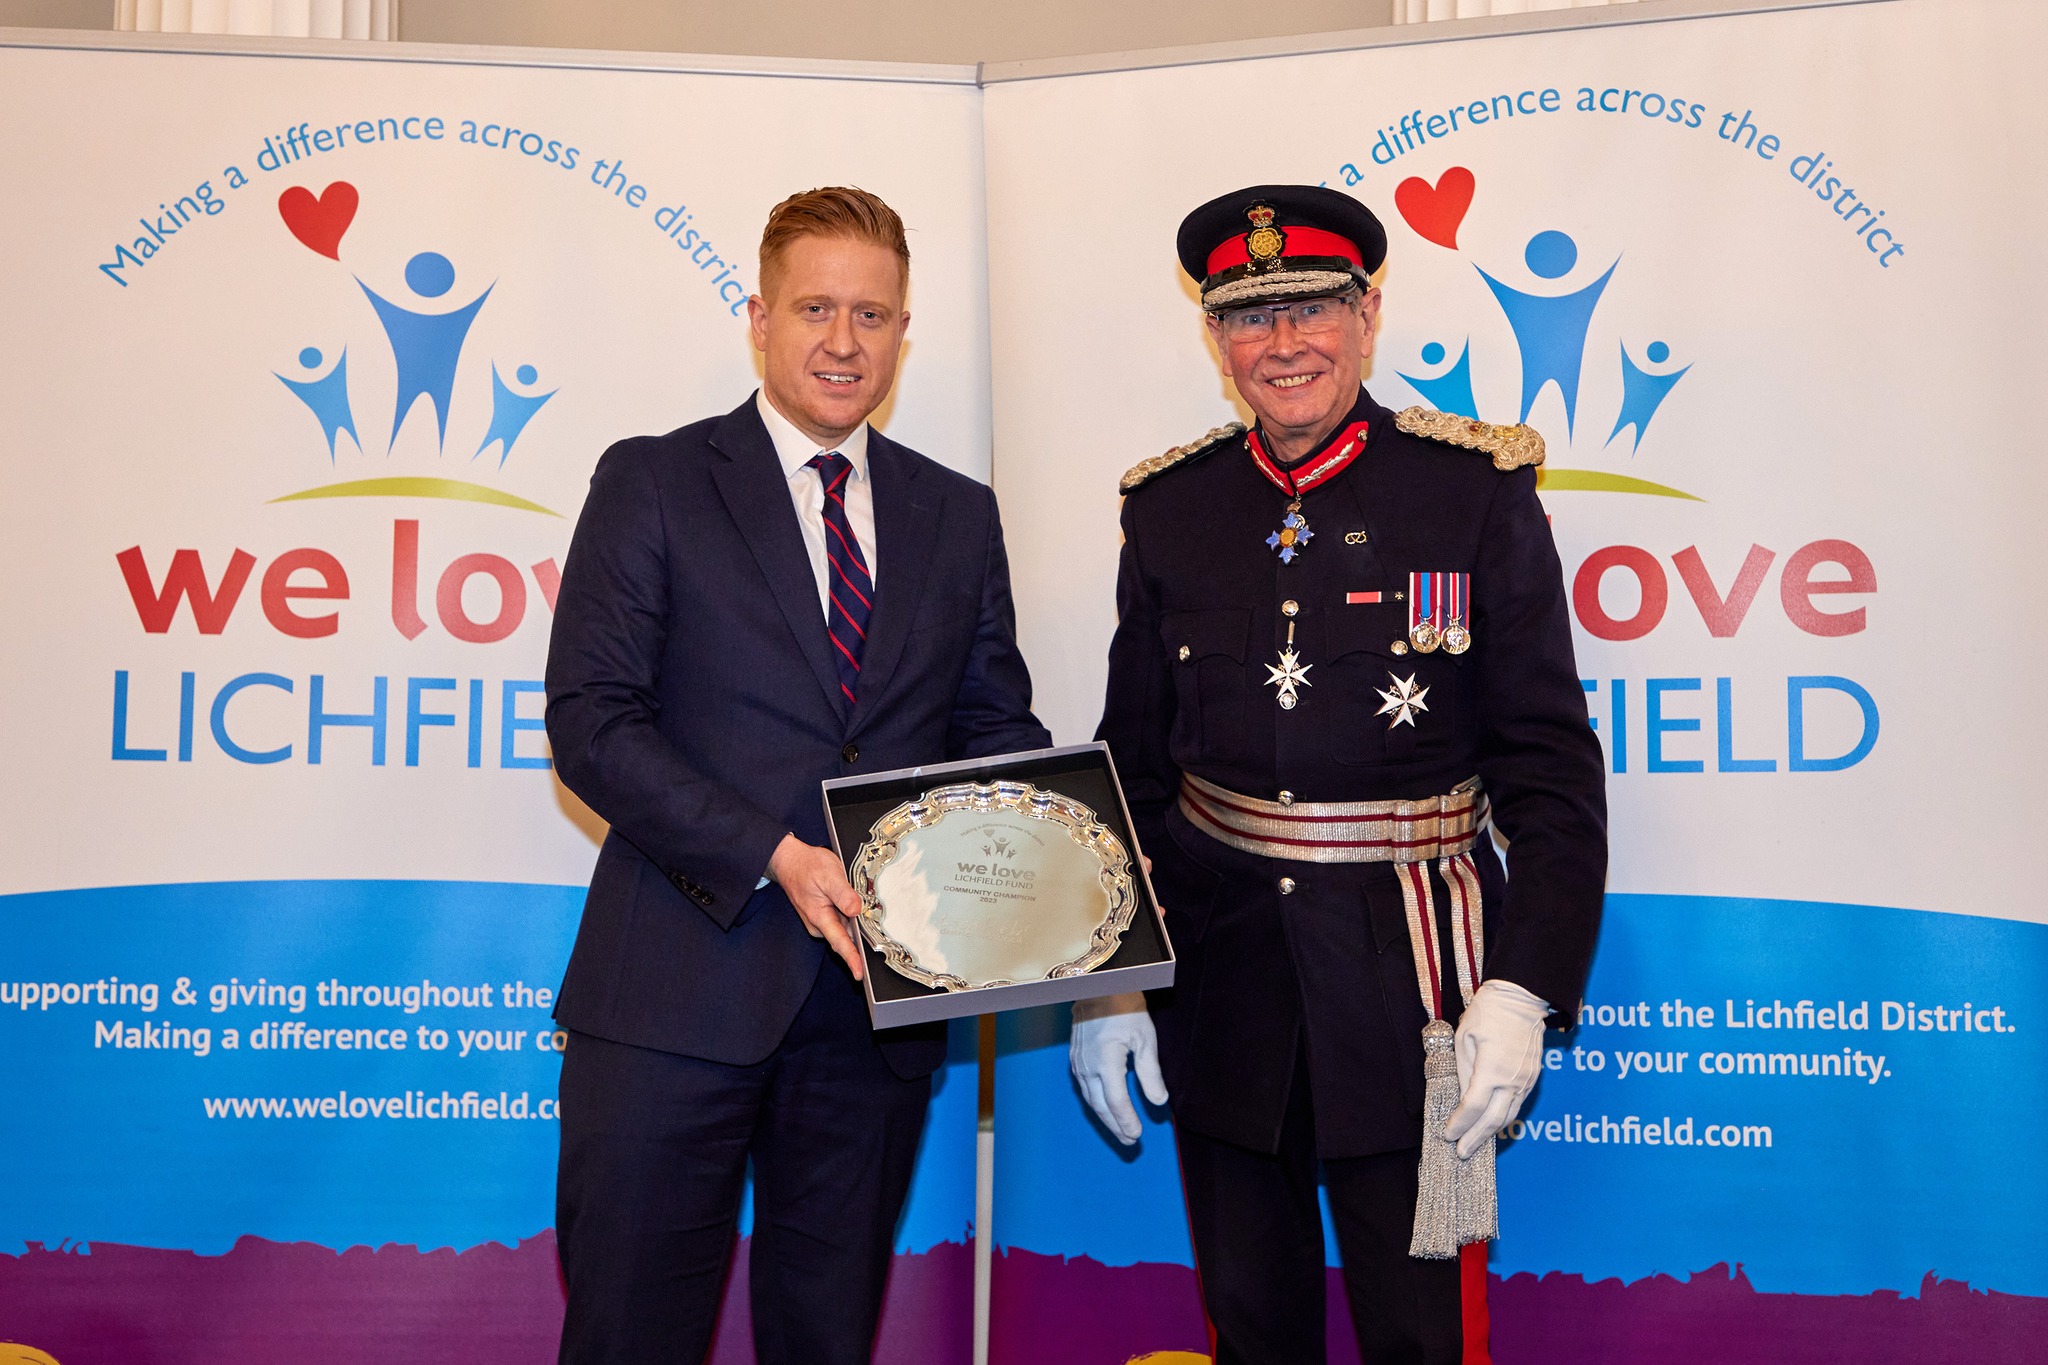 A picture of the Leader of Lichfield District Council, Councillor Doug Pullen, receiving the award on behalf of Lichfield District Council from The Lord Lieutenant of Staffordshire, Ian Dudson.